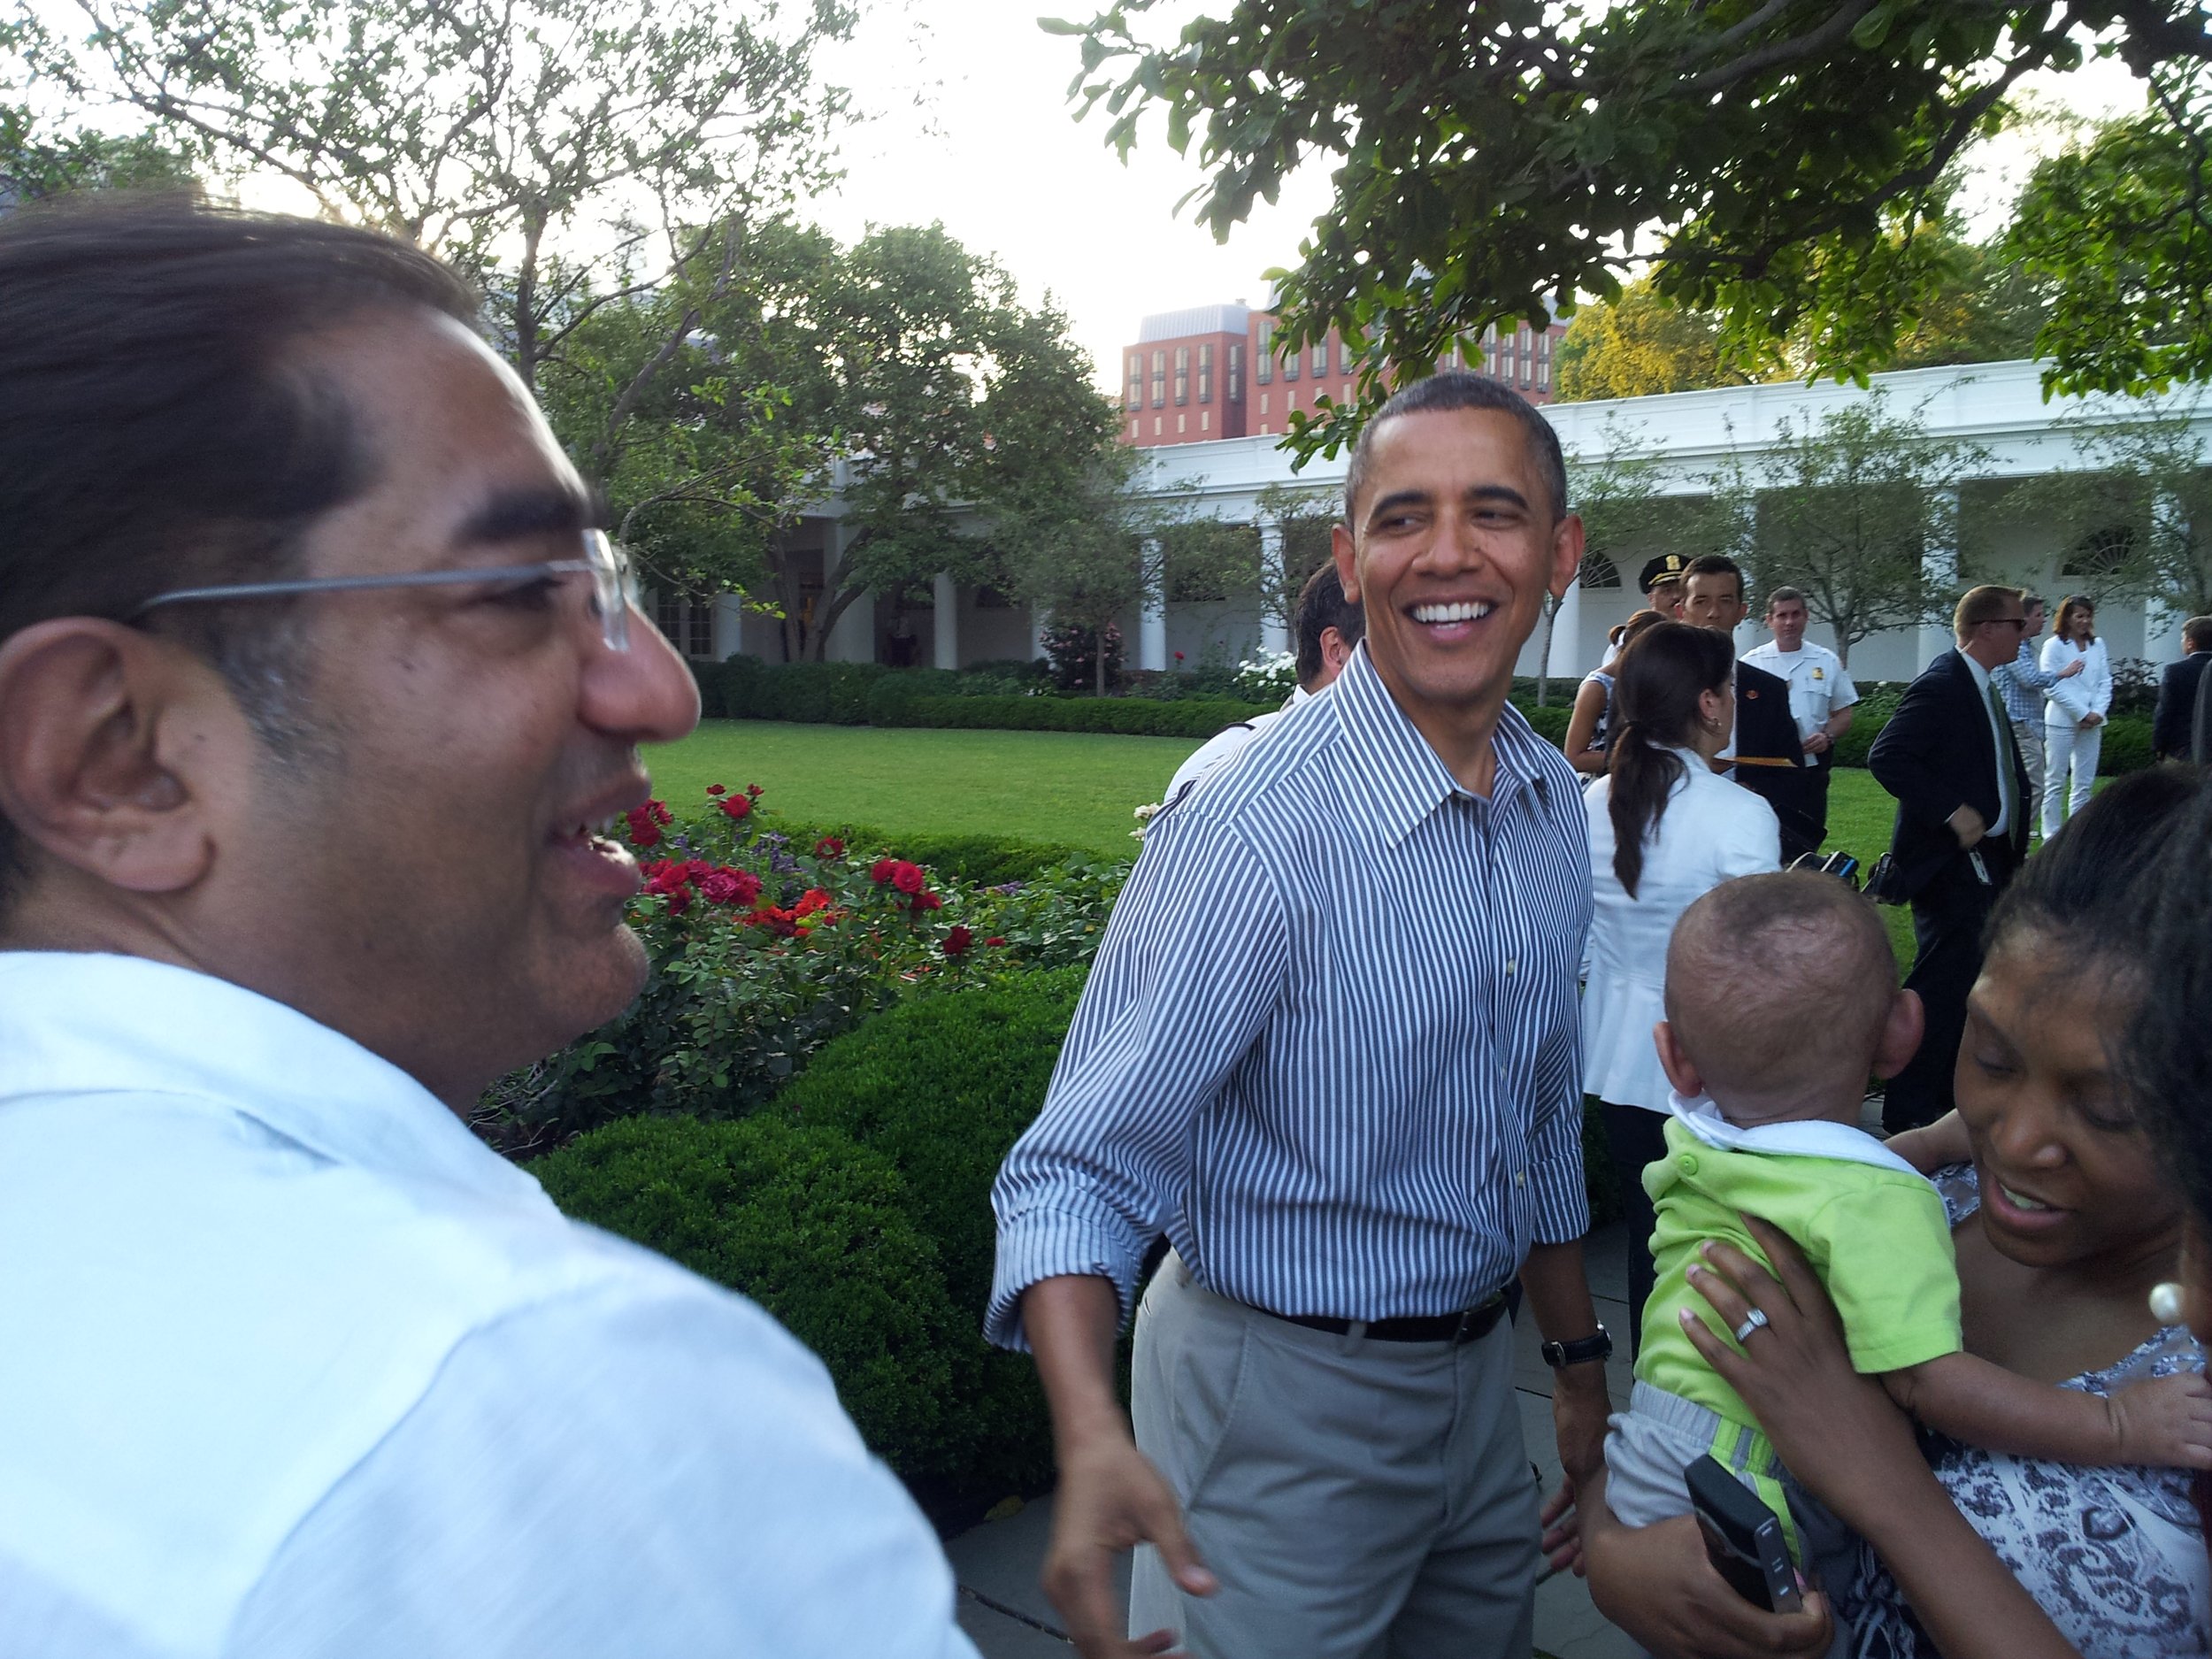 With Obama-2 6-27-12 at the WH Picnic.jpg